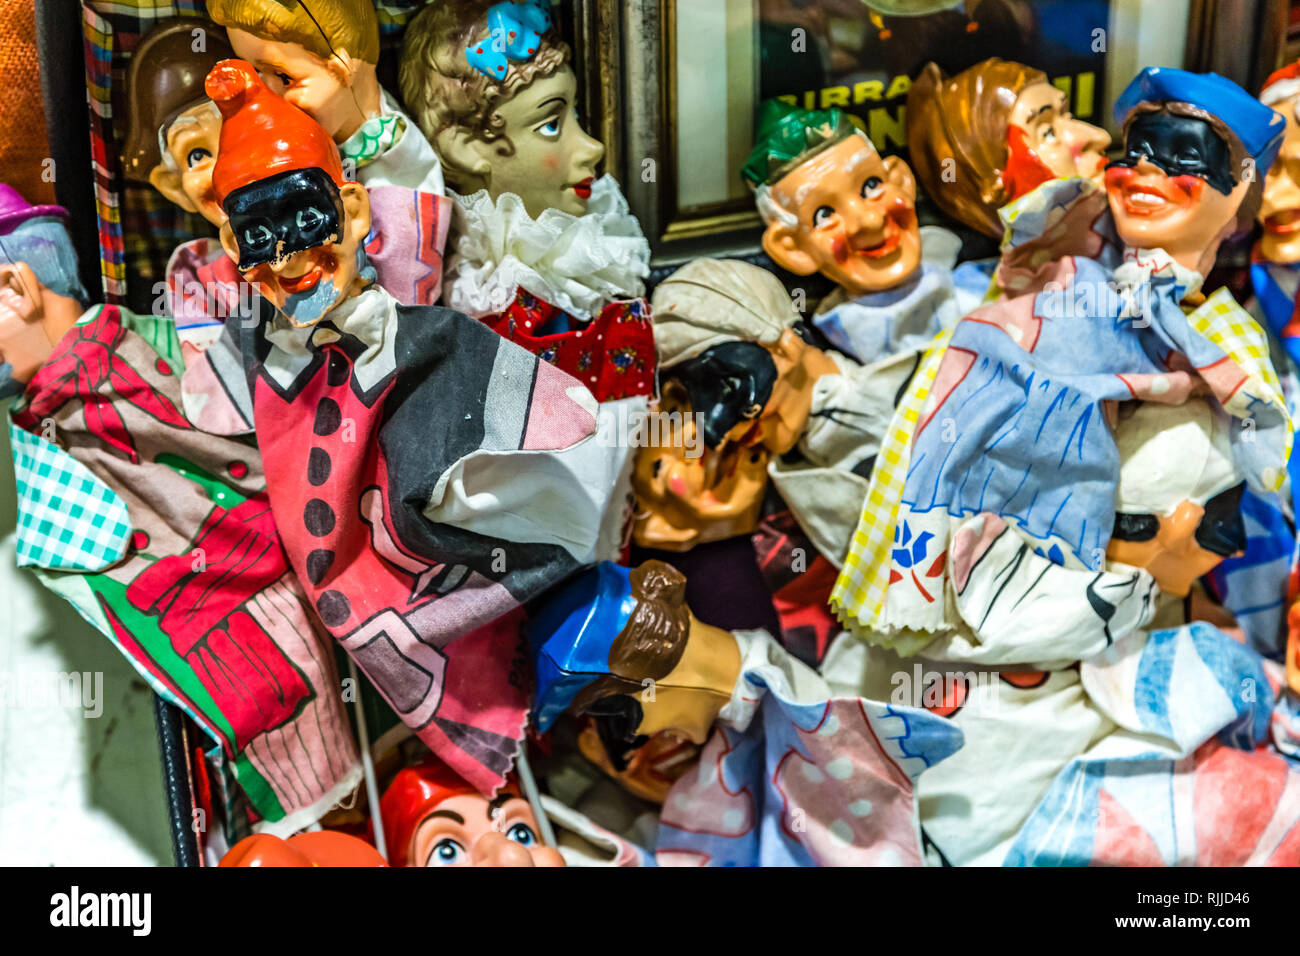 CESENA, ITALY - NOVEMBER 18, 2018: lights are enlightening Italian hand puppets for sale in Antiques Fair Stock Photo